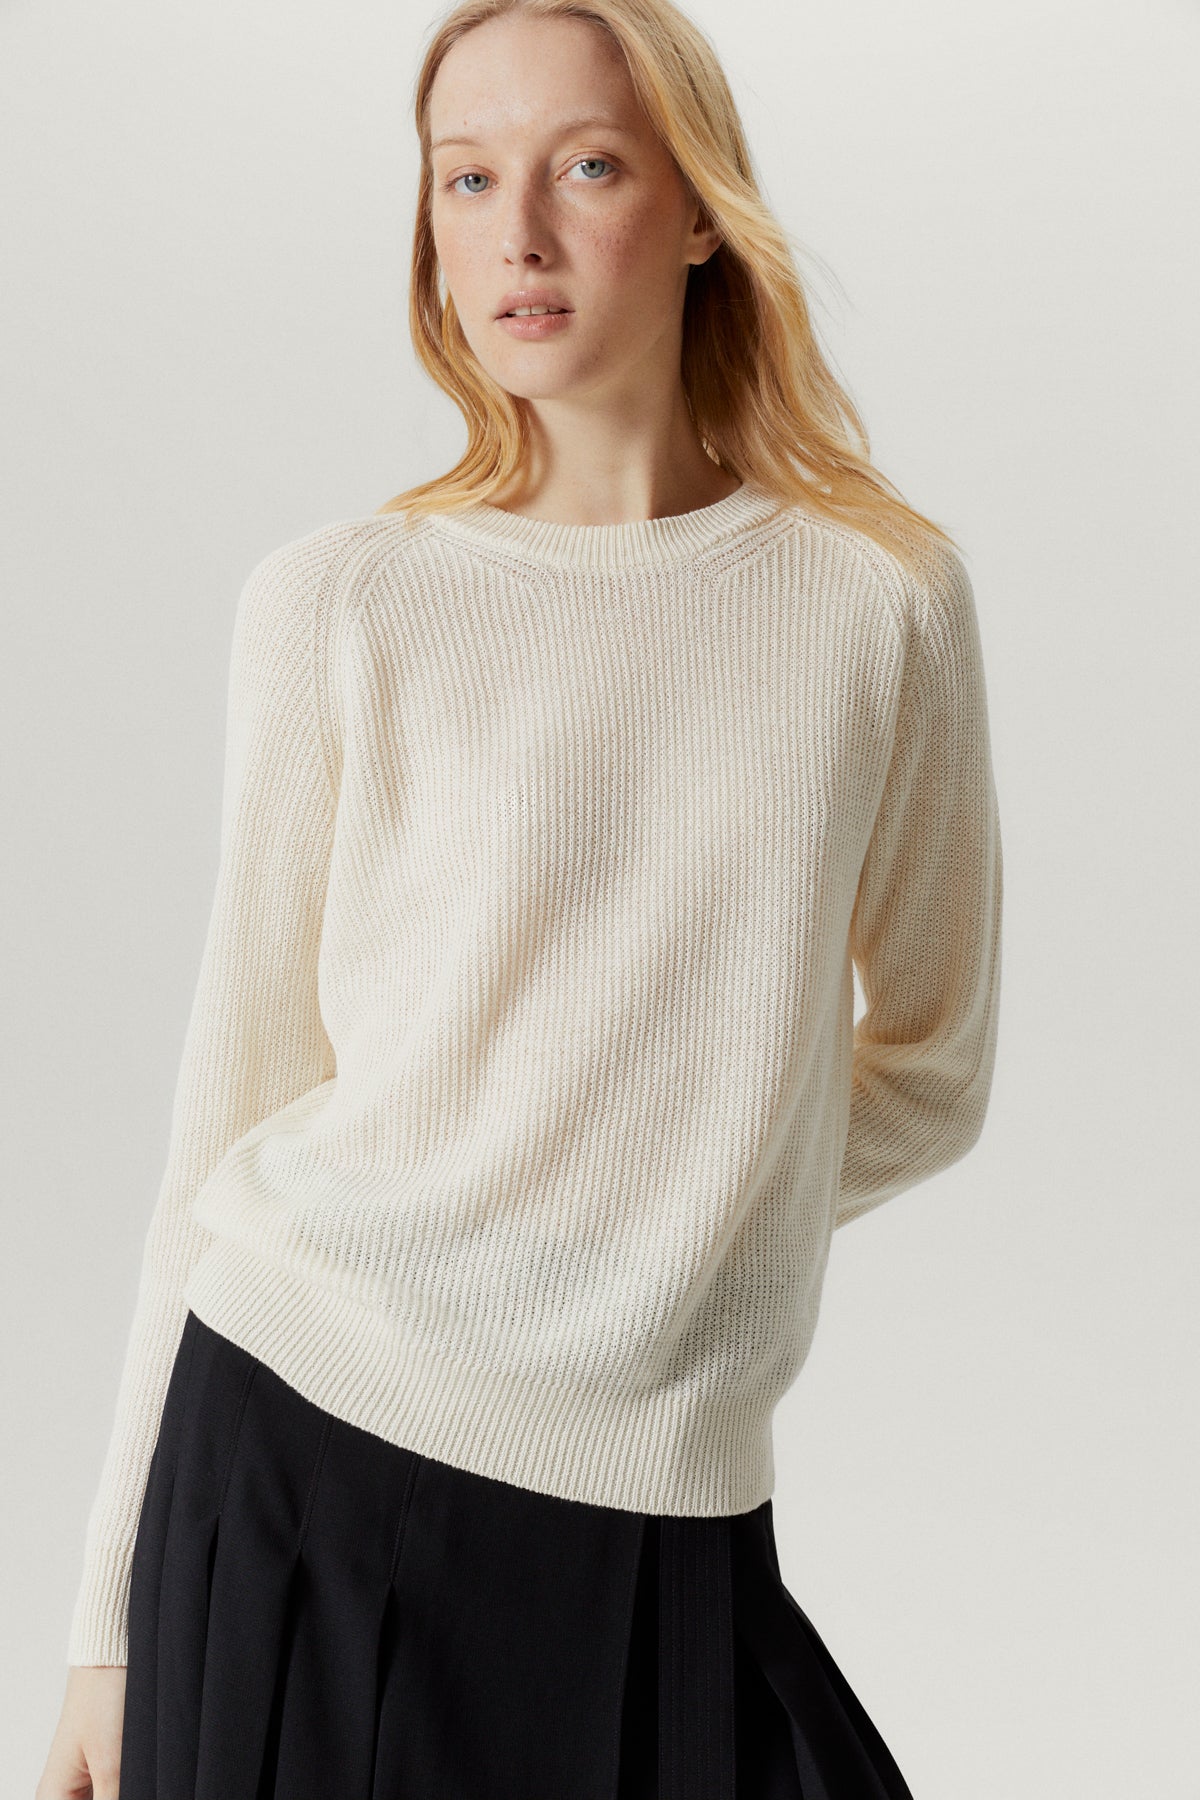 the linen cotton ribbed sweater milk white